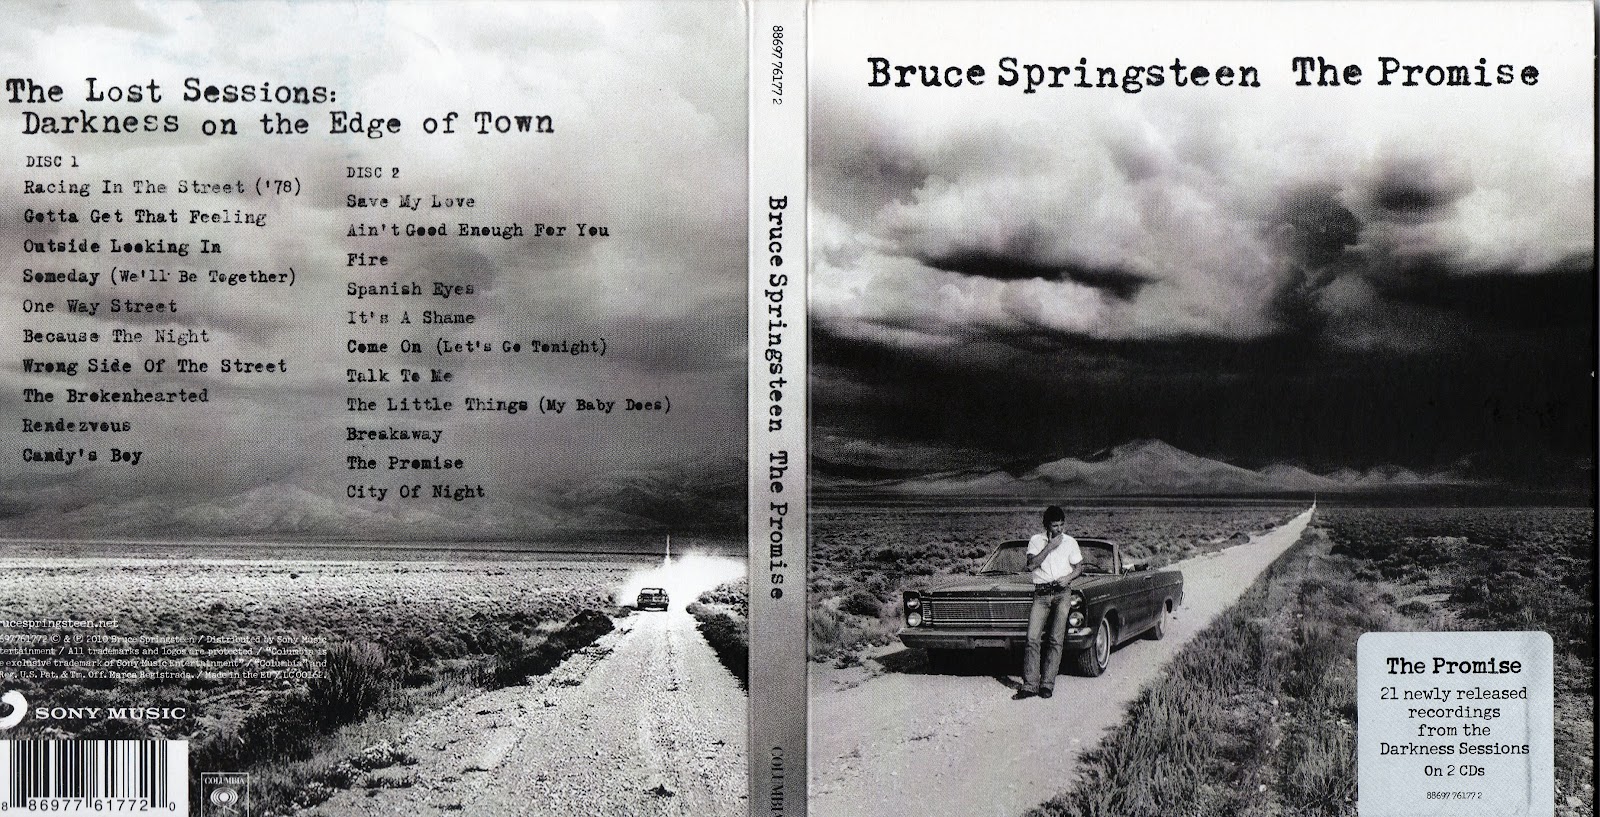 Image result for bruce springsteen the promise the darkness on the edge of town story